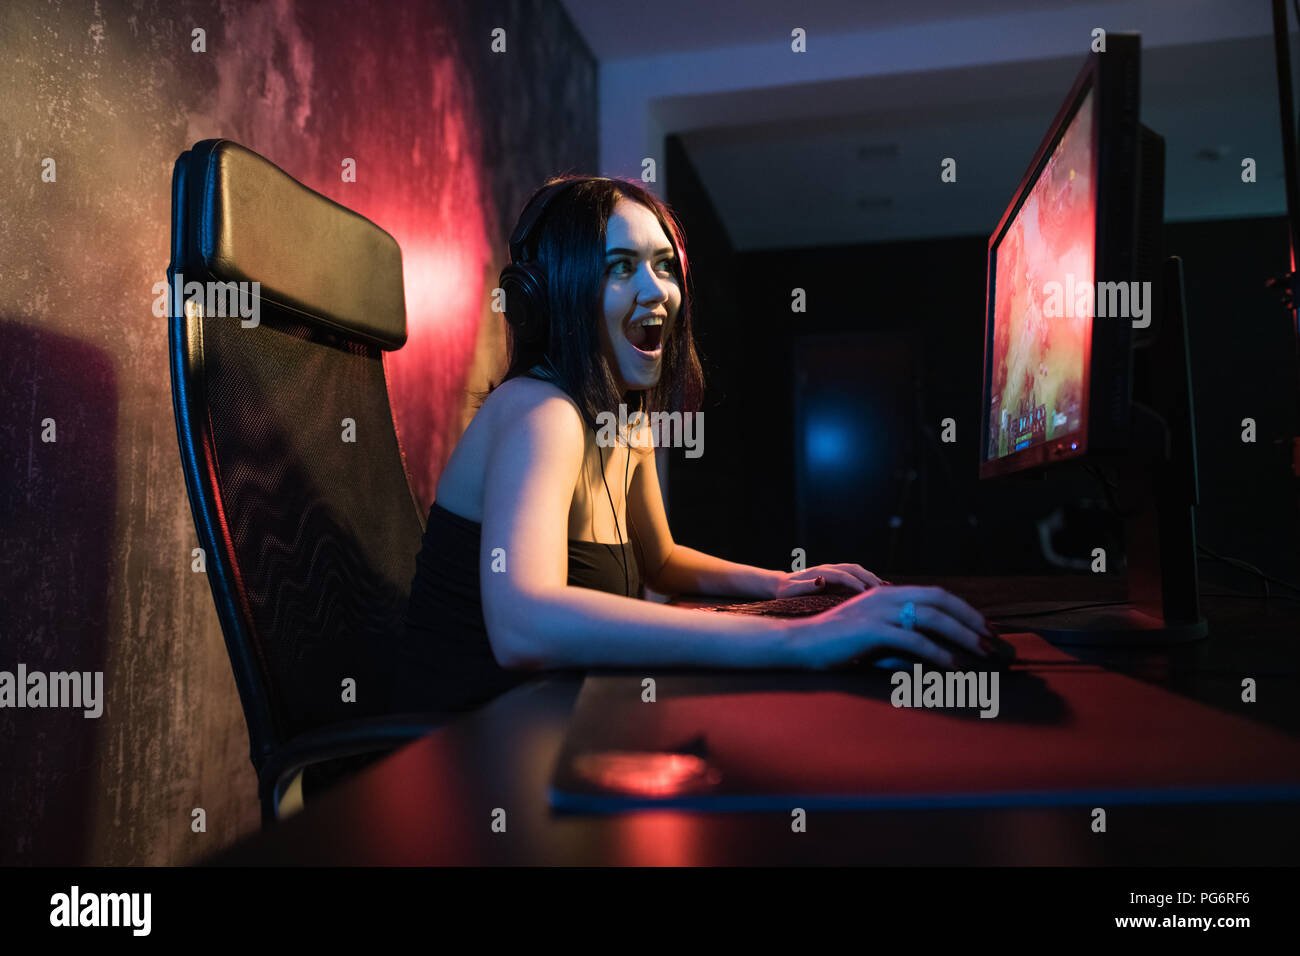 Pro Player Gamer Young Asian Woman Playing Online Video Game Shooting Stock  Photo - Image of excited, focused: 183381816